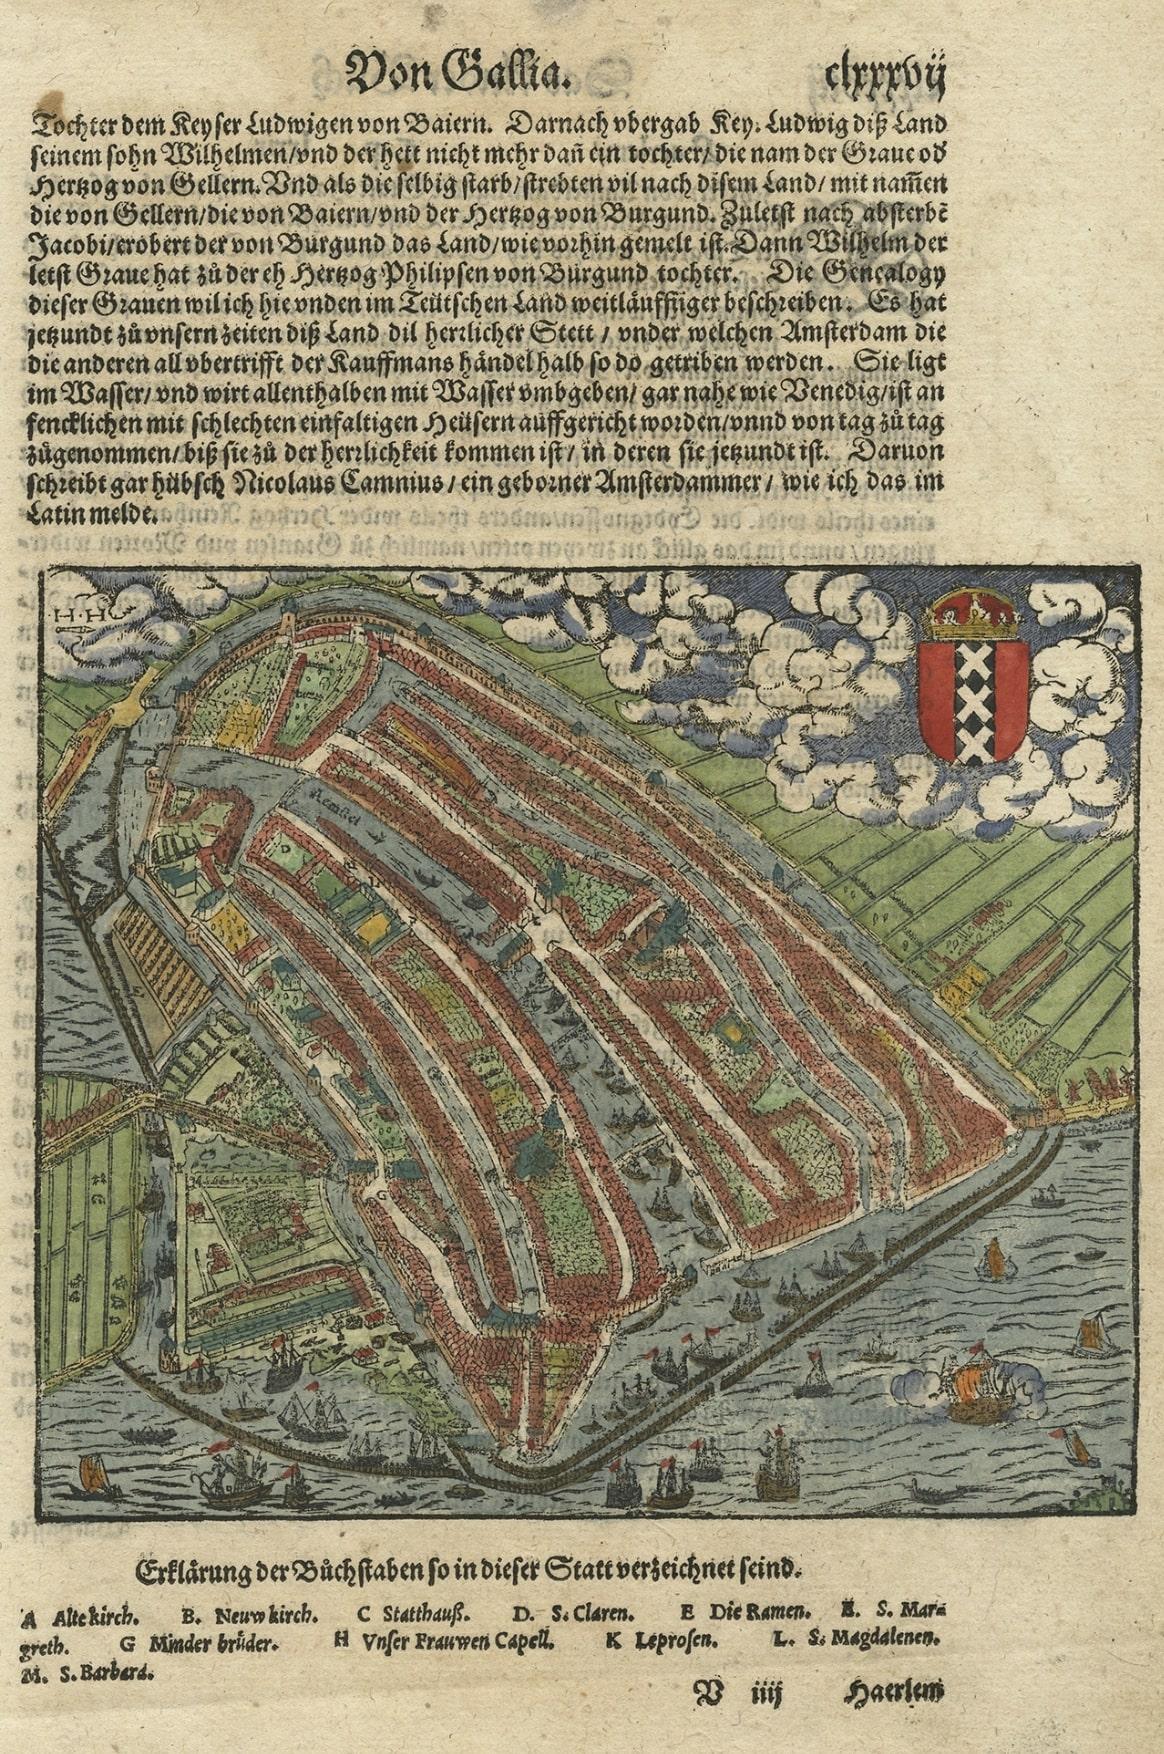 Description: Antique print, untitled. 

Bird's-eye plan of Amsterdam portrayed on a sheet of German text. Remarkably detailed for its size, hundreds of individual buildings and houses are rendered. Dozens of tall ships ply the harbor and the